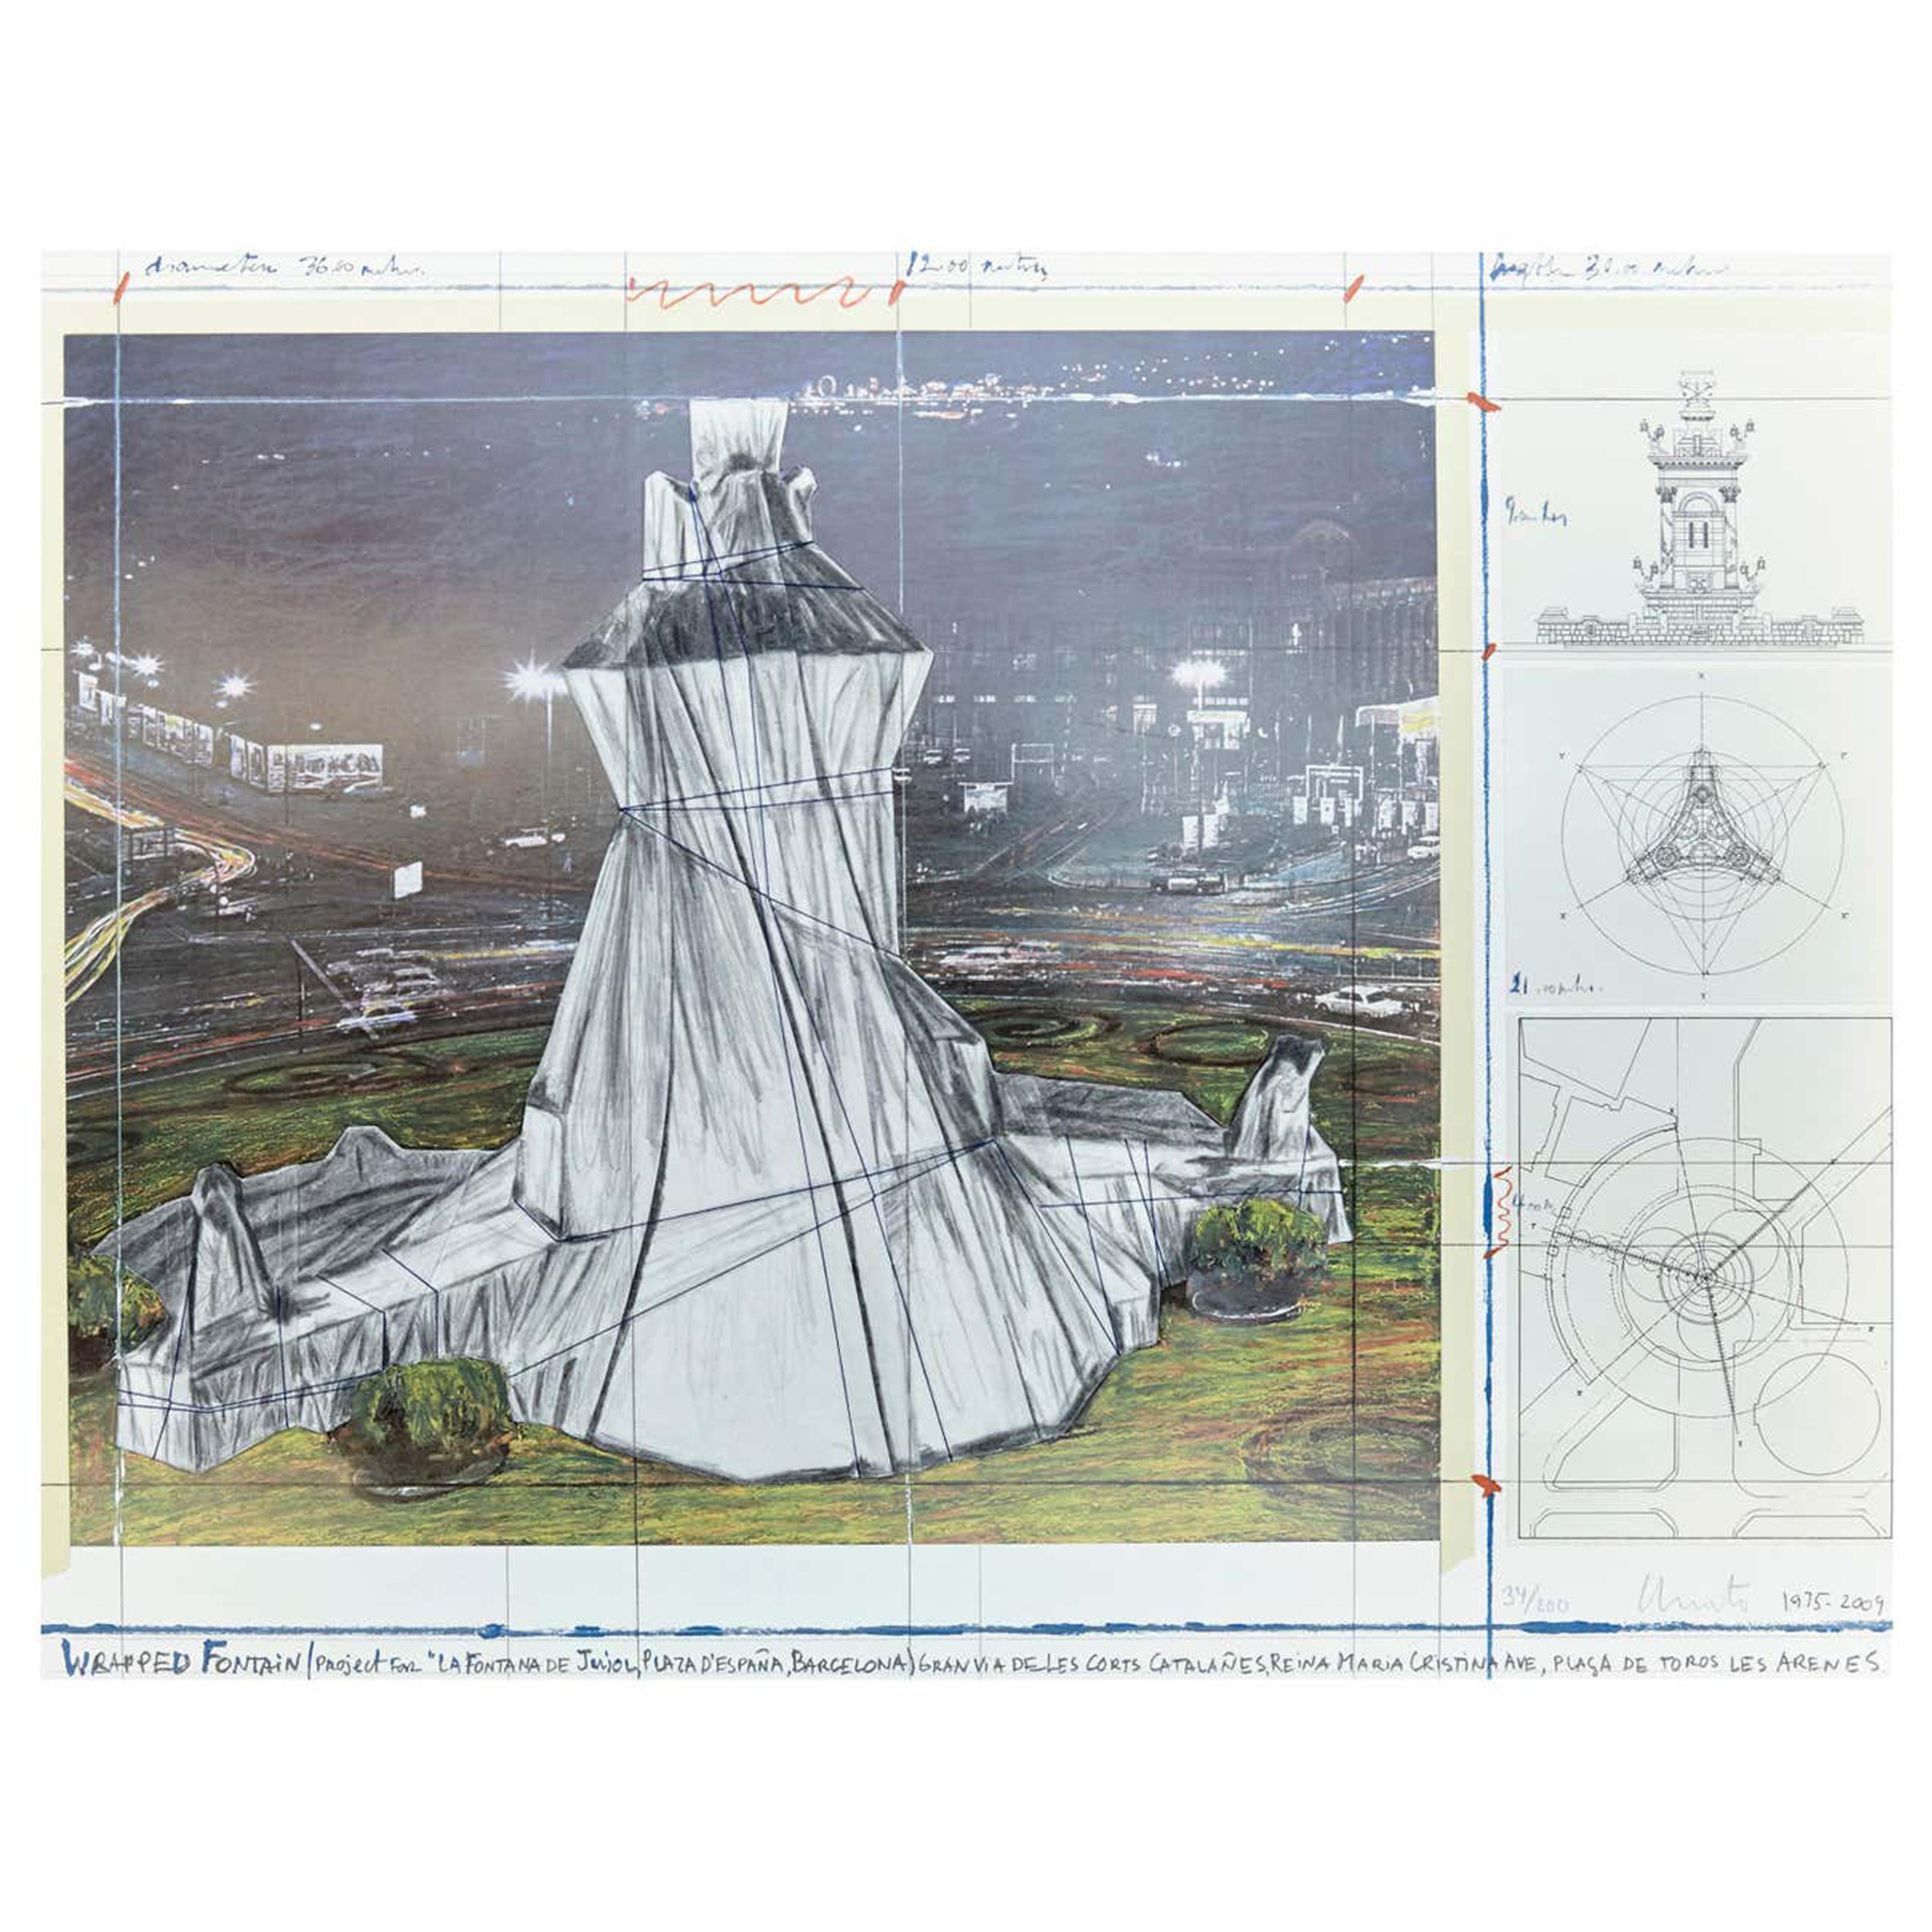 Christo lithograph-collage
Lithograph-collage (Architectural drawings by Pere Casajoana Architect) 

Wrapped fountain
2009
Measures: 56.0 x 71.5 cm
Numbered 34 of edition 200, the number can be different we have two of them.